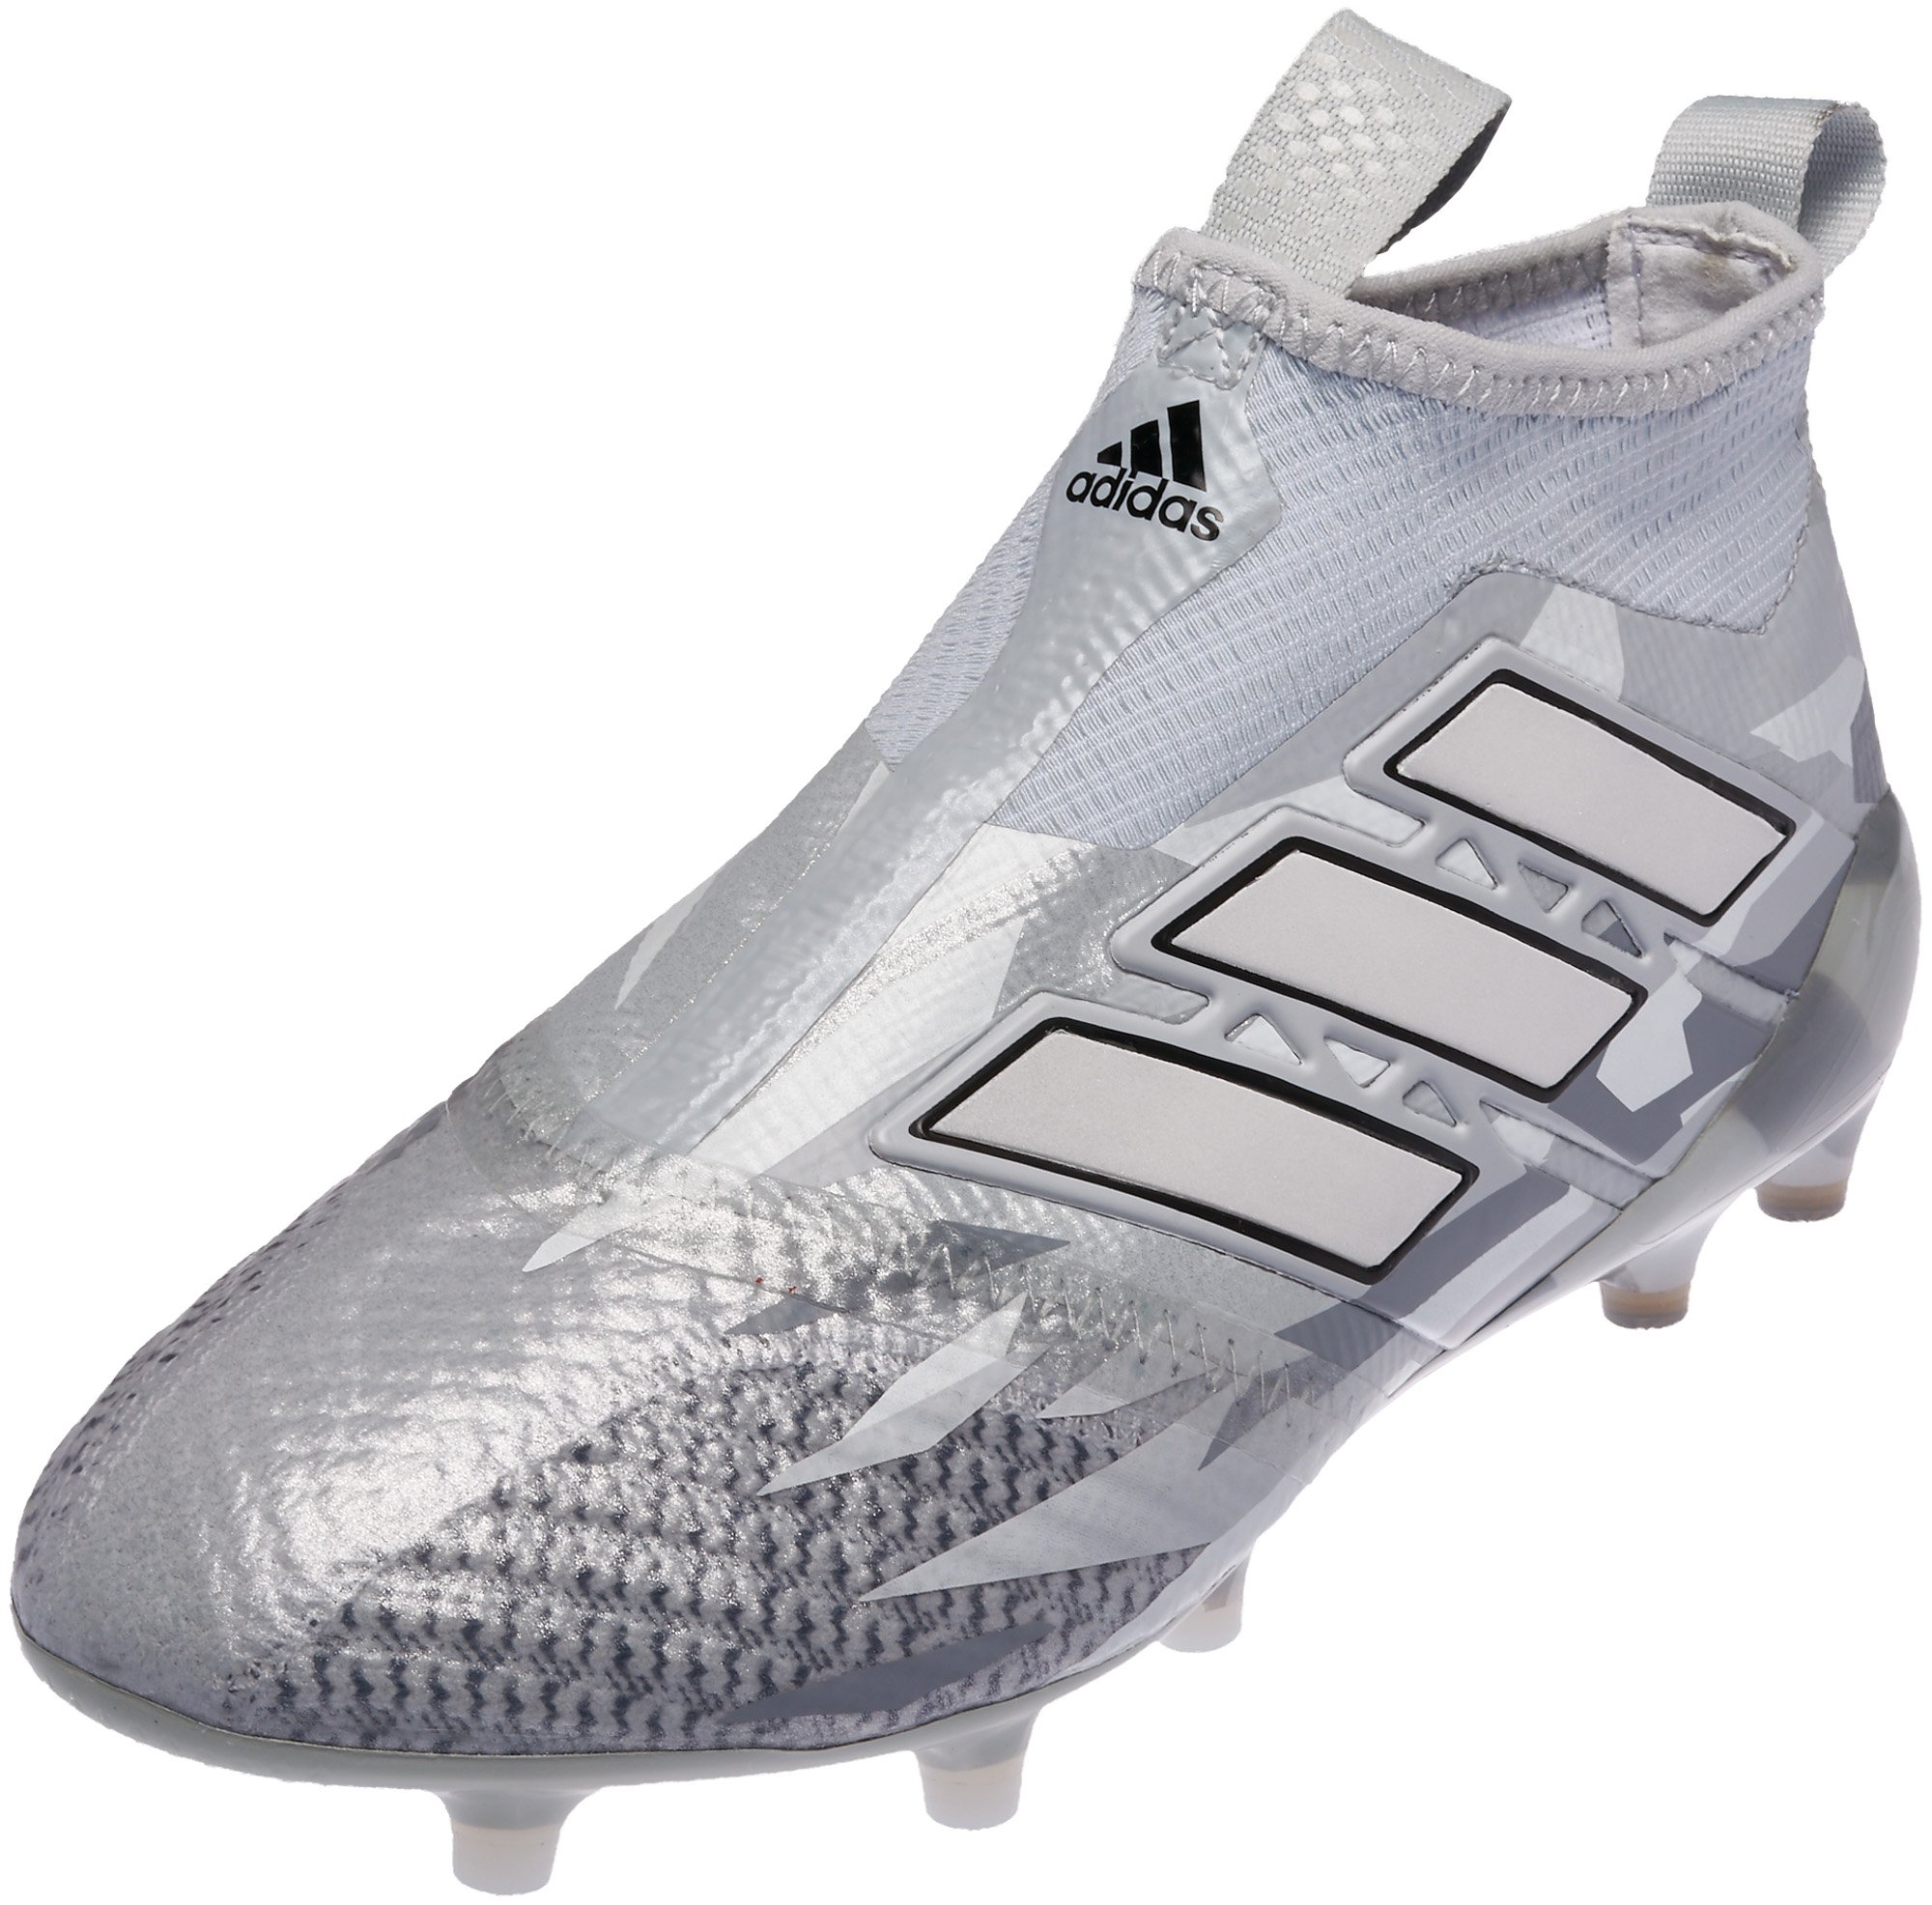 adidas ace soccer boots